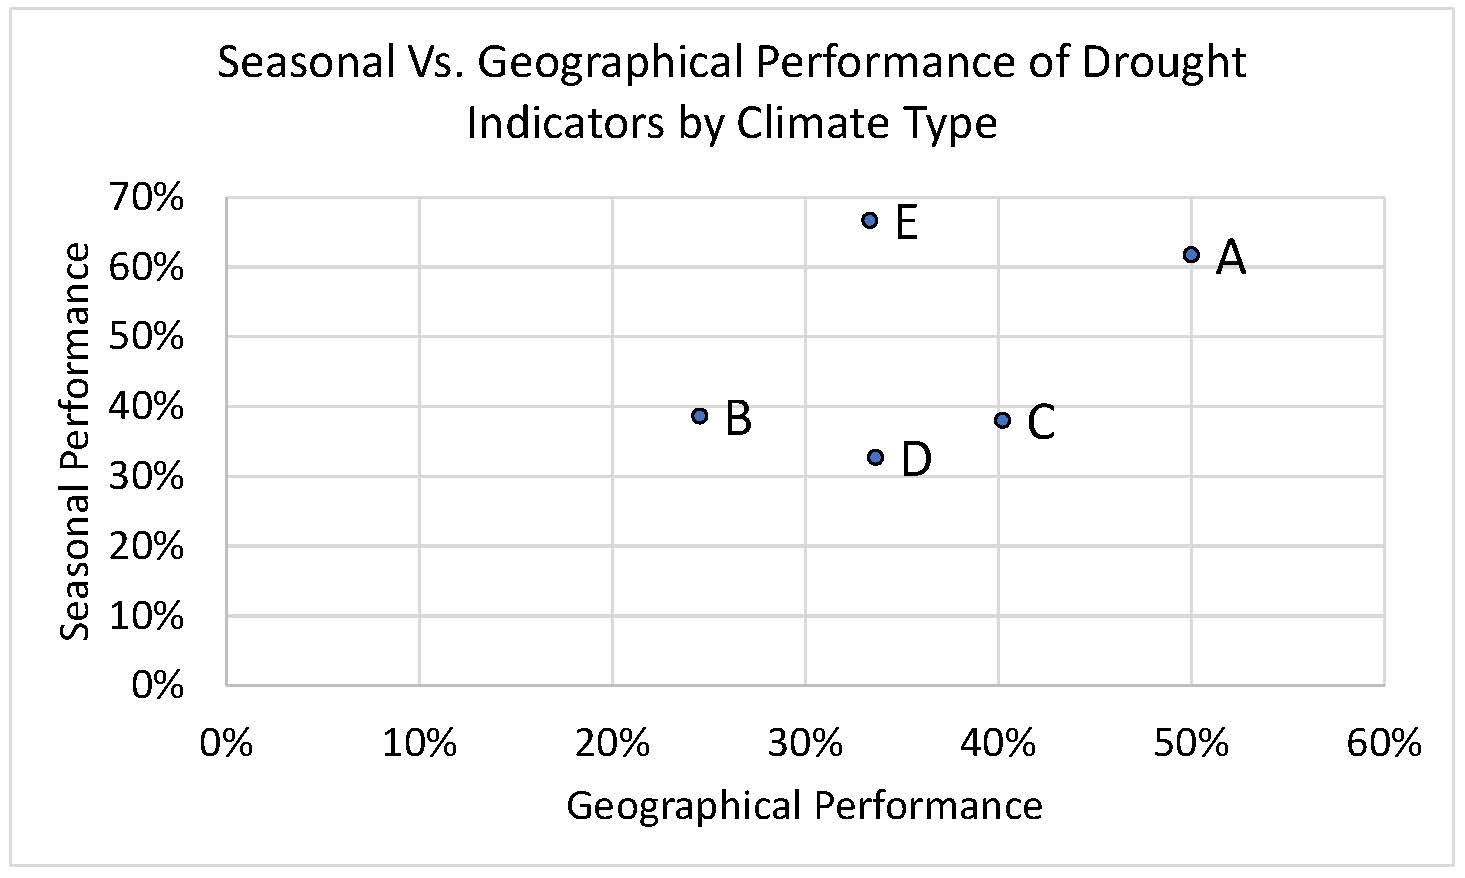 The majority of CEC survey respondents said drought indices and indicators performed best across seasons and locations (geography) in Tropical (A) climates. They performed worst across locations (geography) in Arid (B) climates and worst across seasons in Continental (D) climates. Indices and indicators were thought to perform best across seasons in Polar ( E ) climates, but there were very few respondents for E climates so that result should be considered tentative.